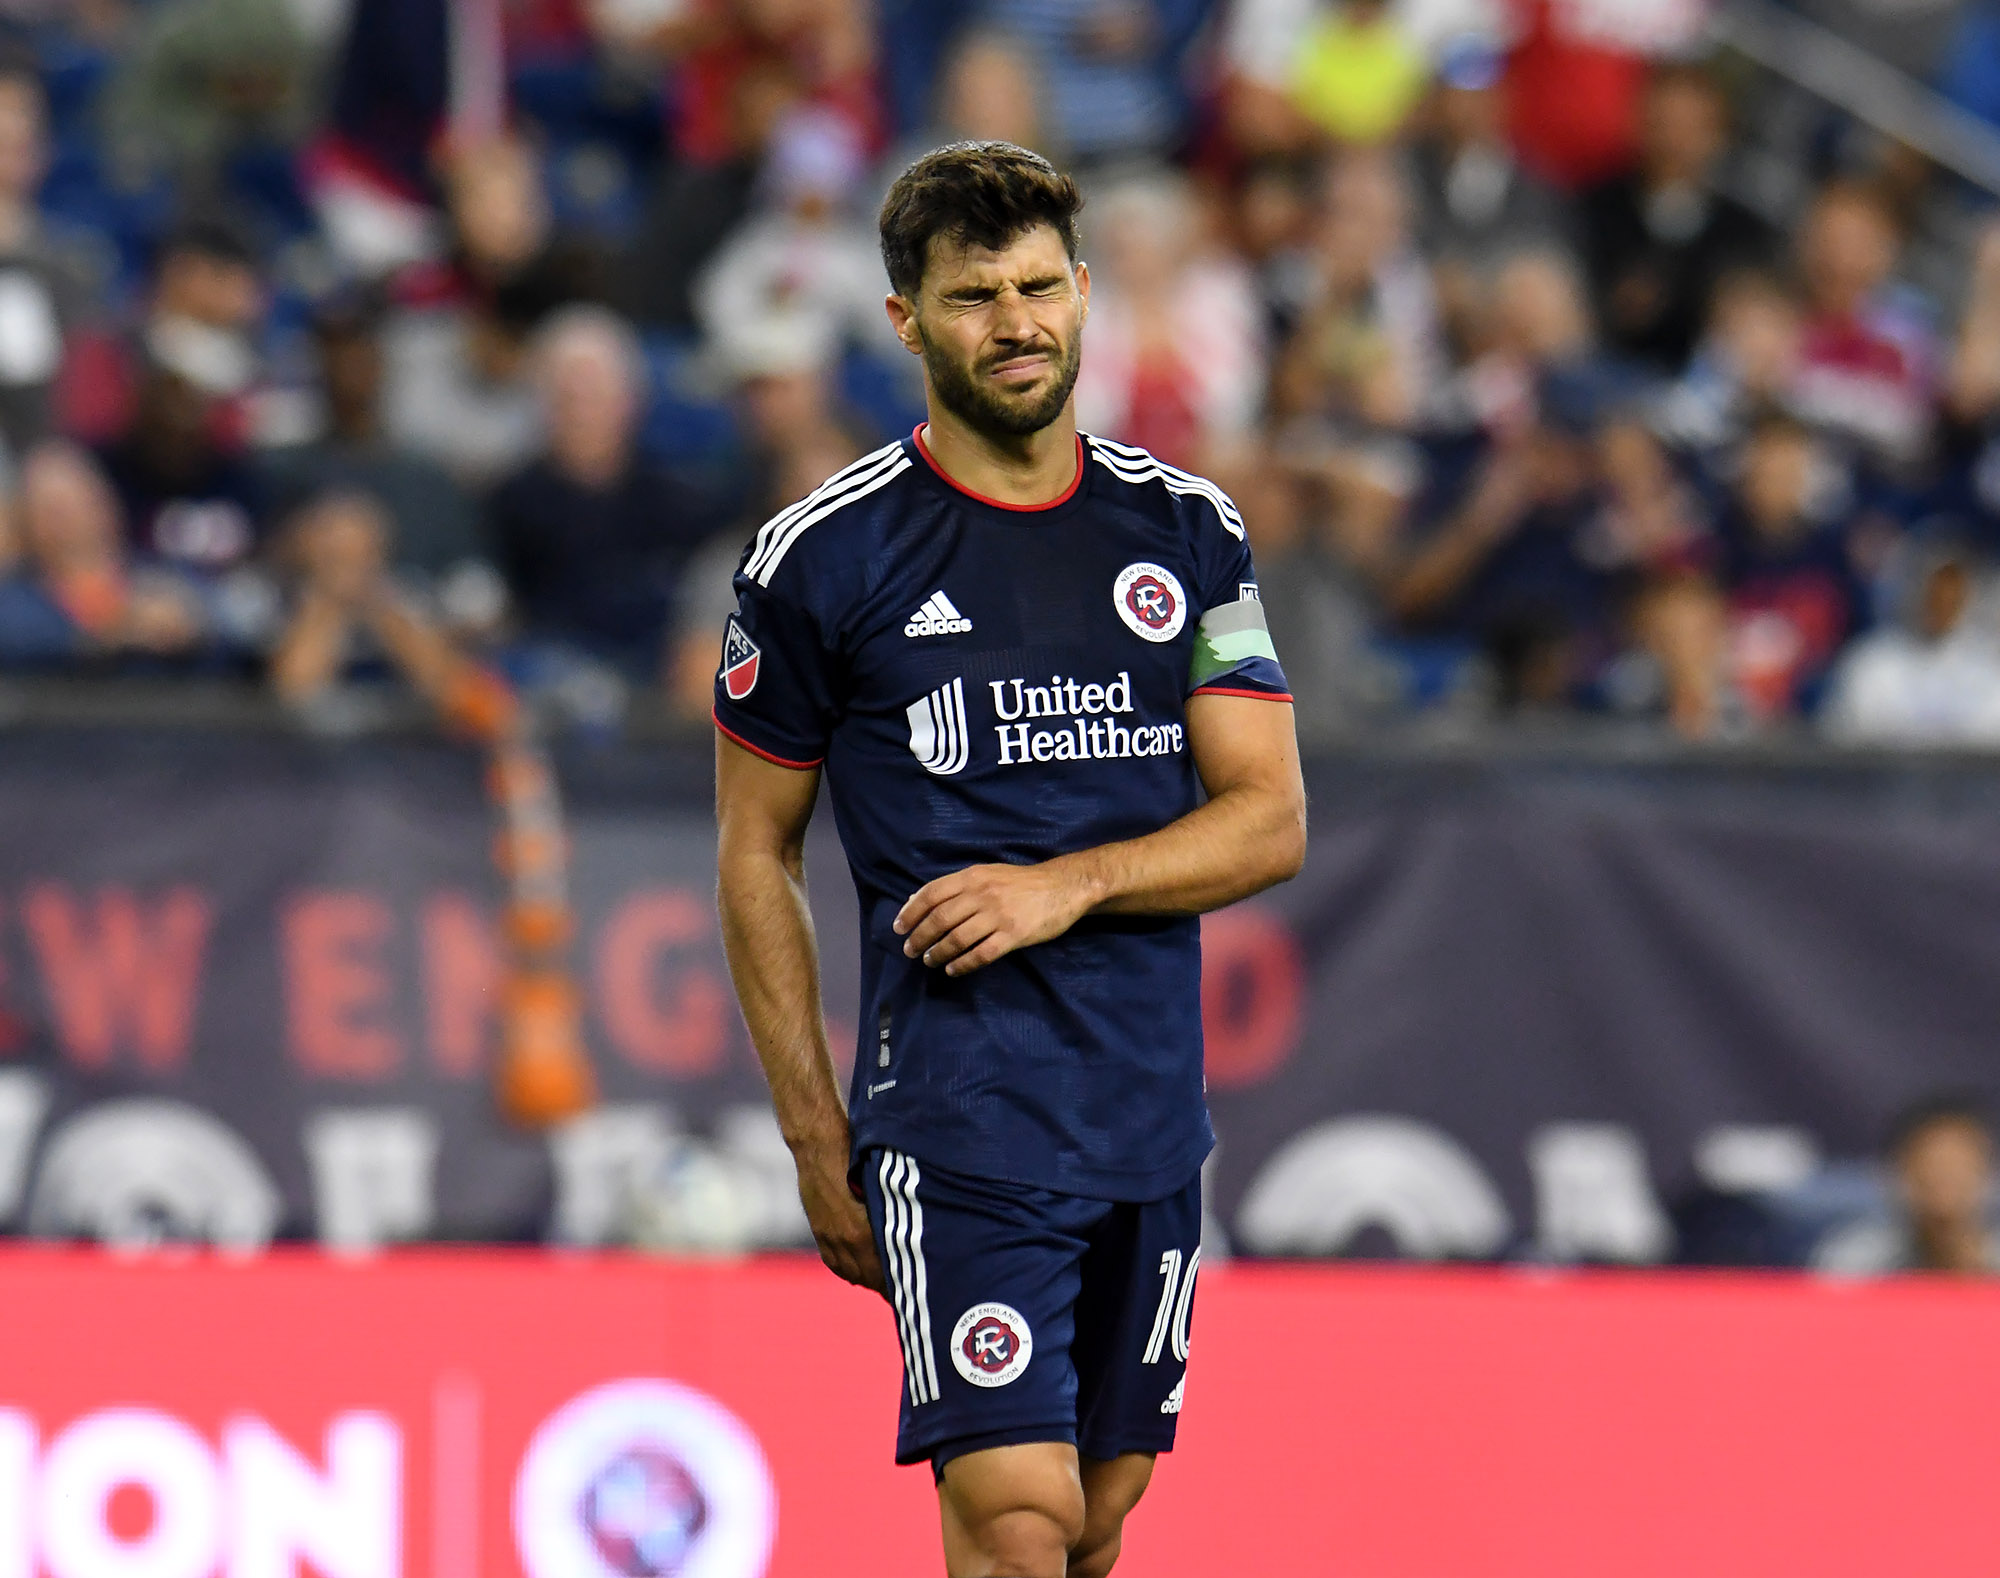 The Revolution's dramatic run through the MLS playoffs has ended